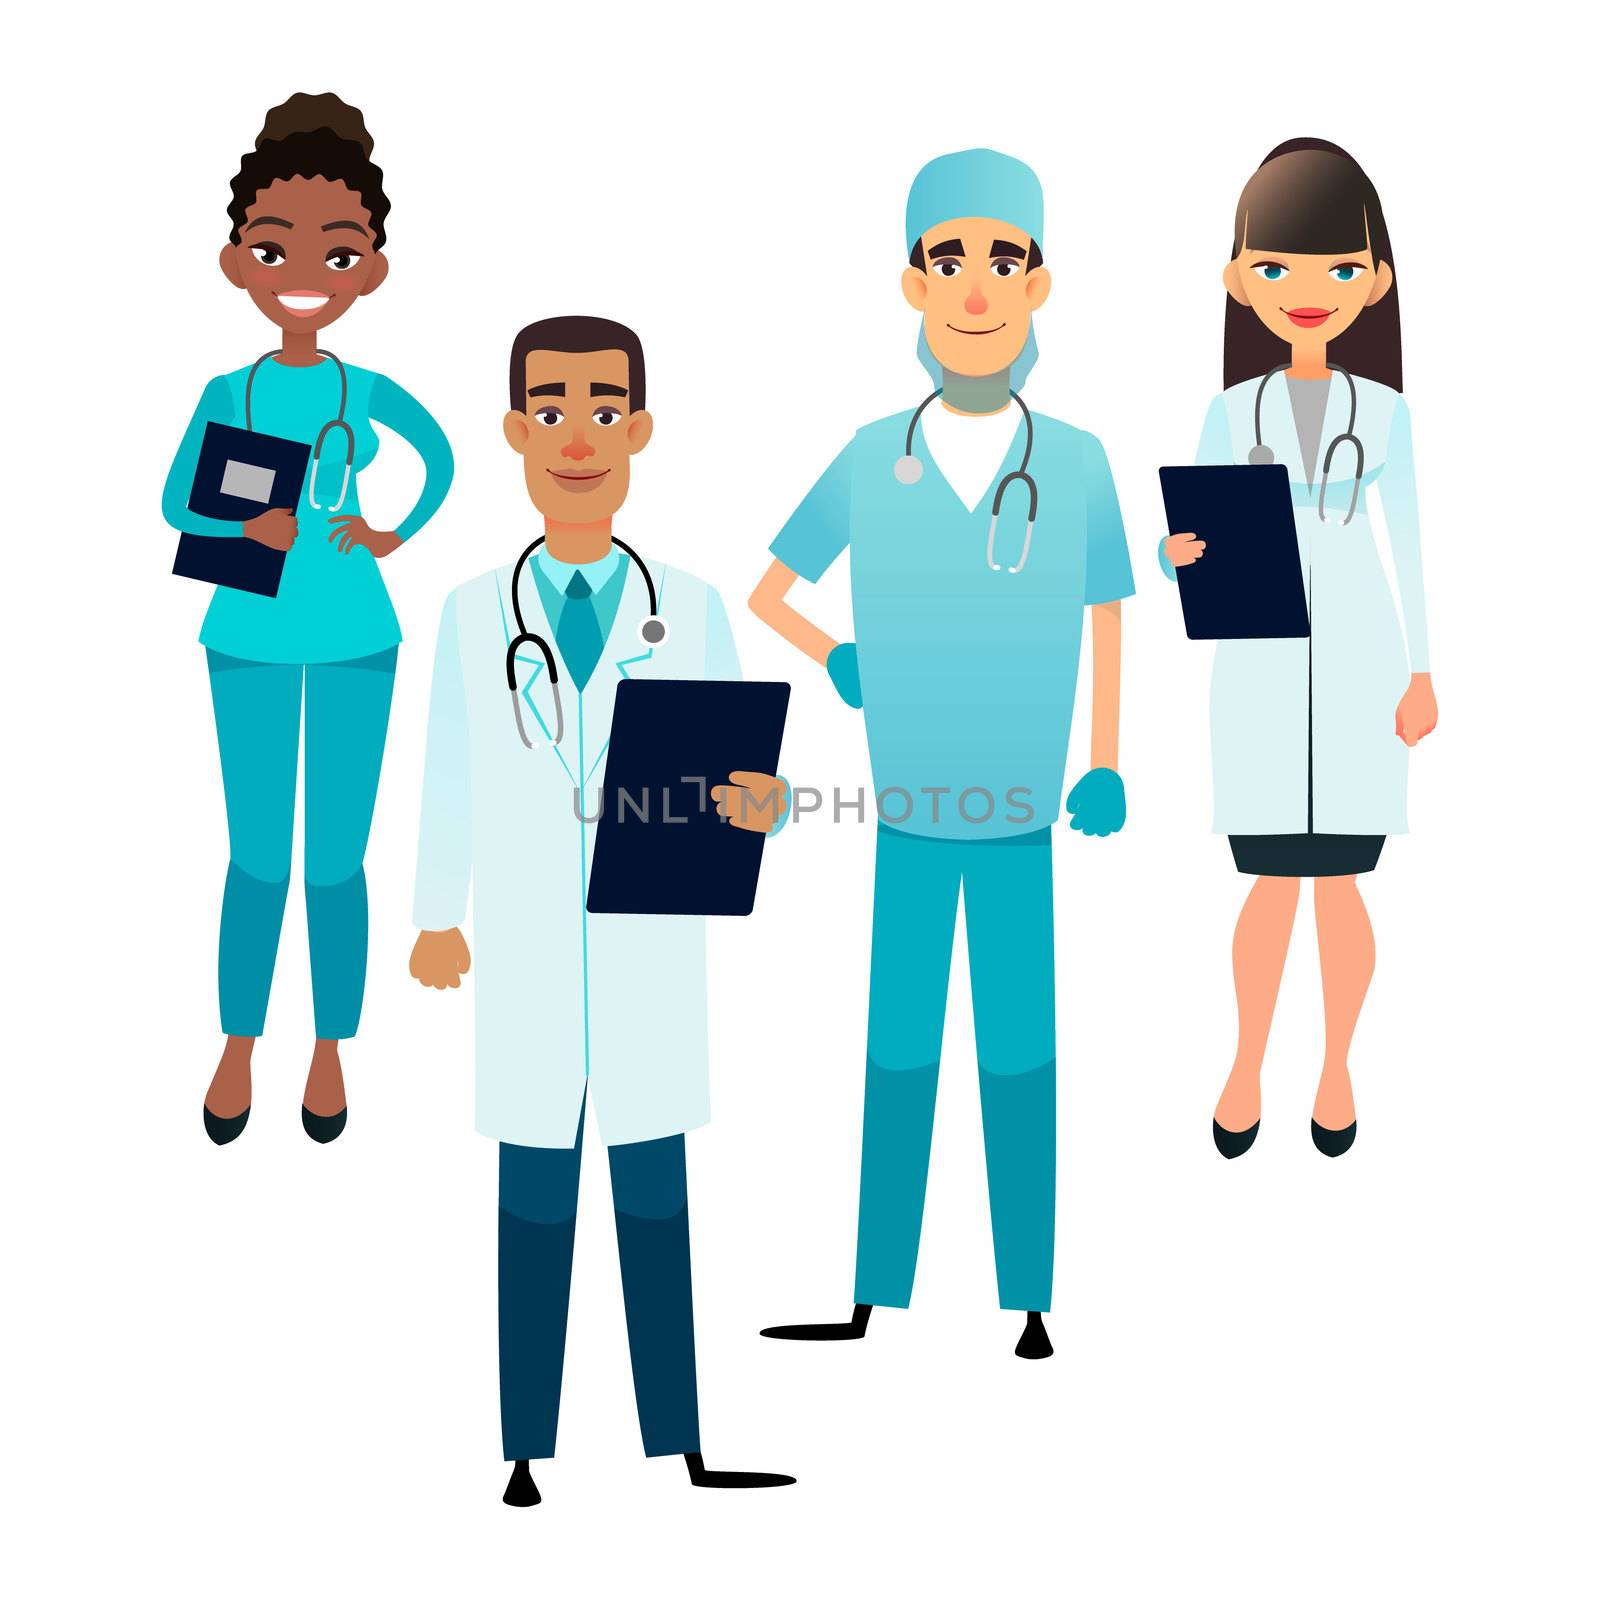 Doctors and nurses team. Cartoon medical staff. Medical team concept. Surgeon, nurse and therapist on hospital. Professional health workers by Elena_Garder